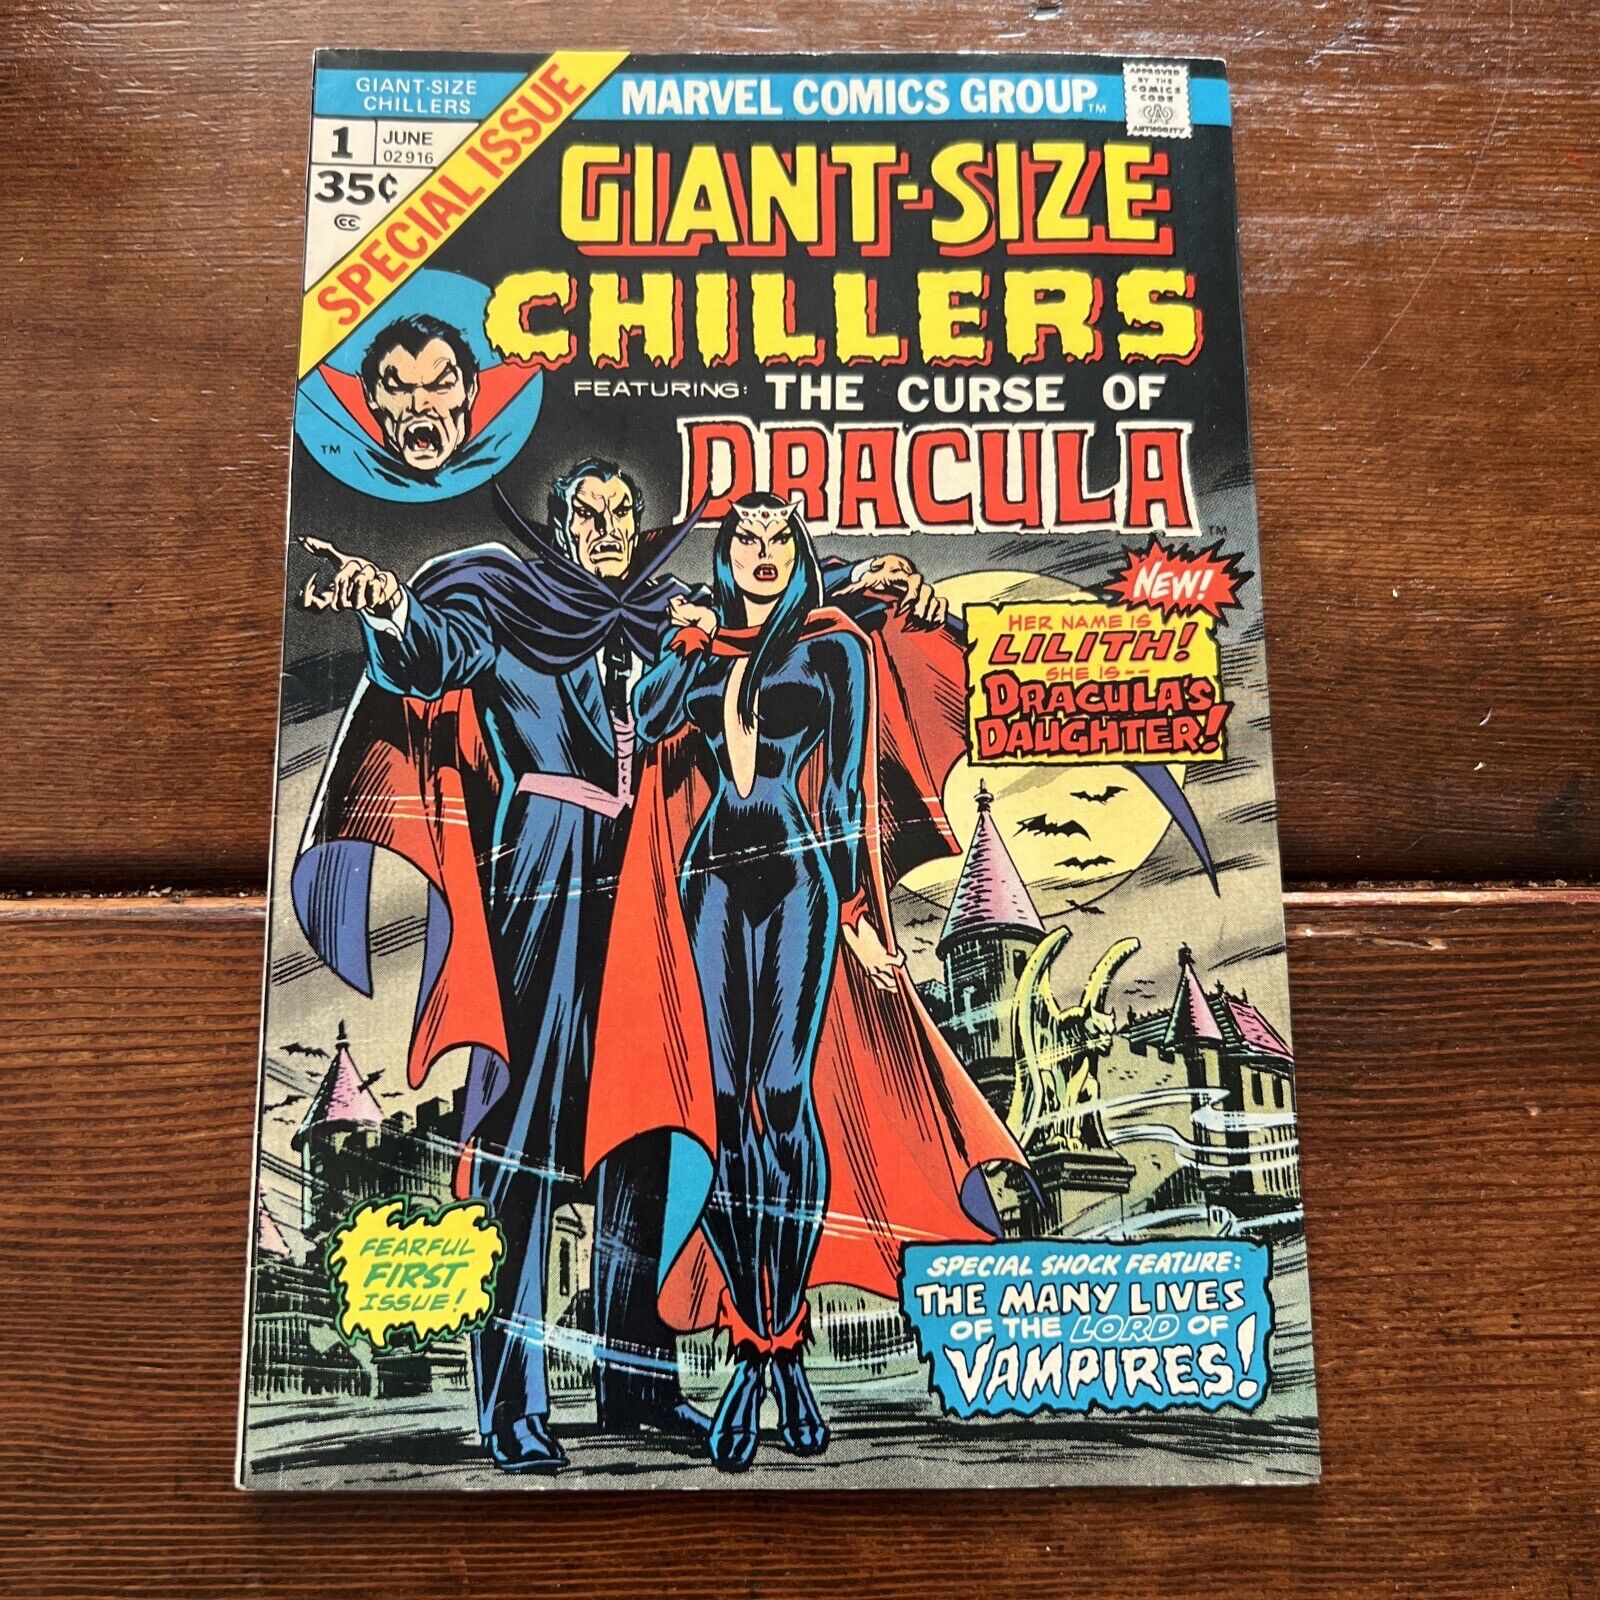 Giant-Size Chillers #1 - 1st Lilith Dracula's Daughter 1974 F-VF